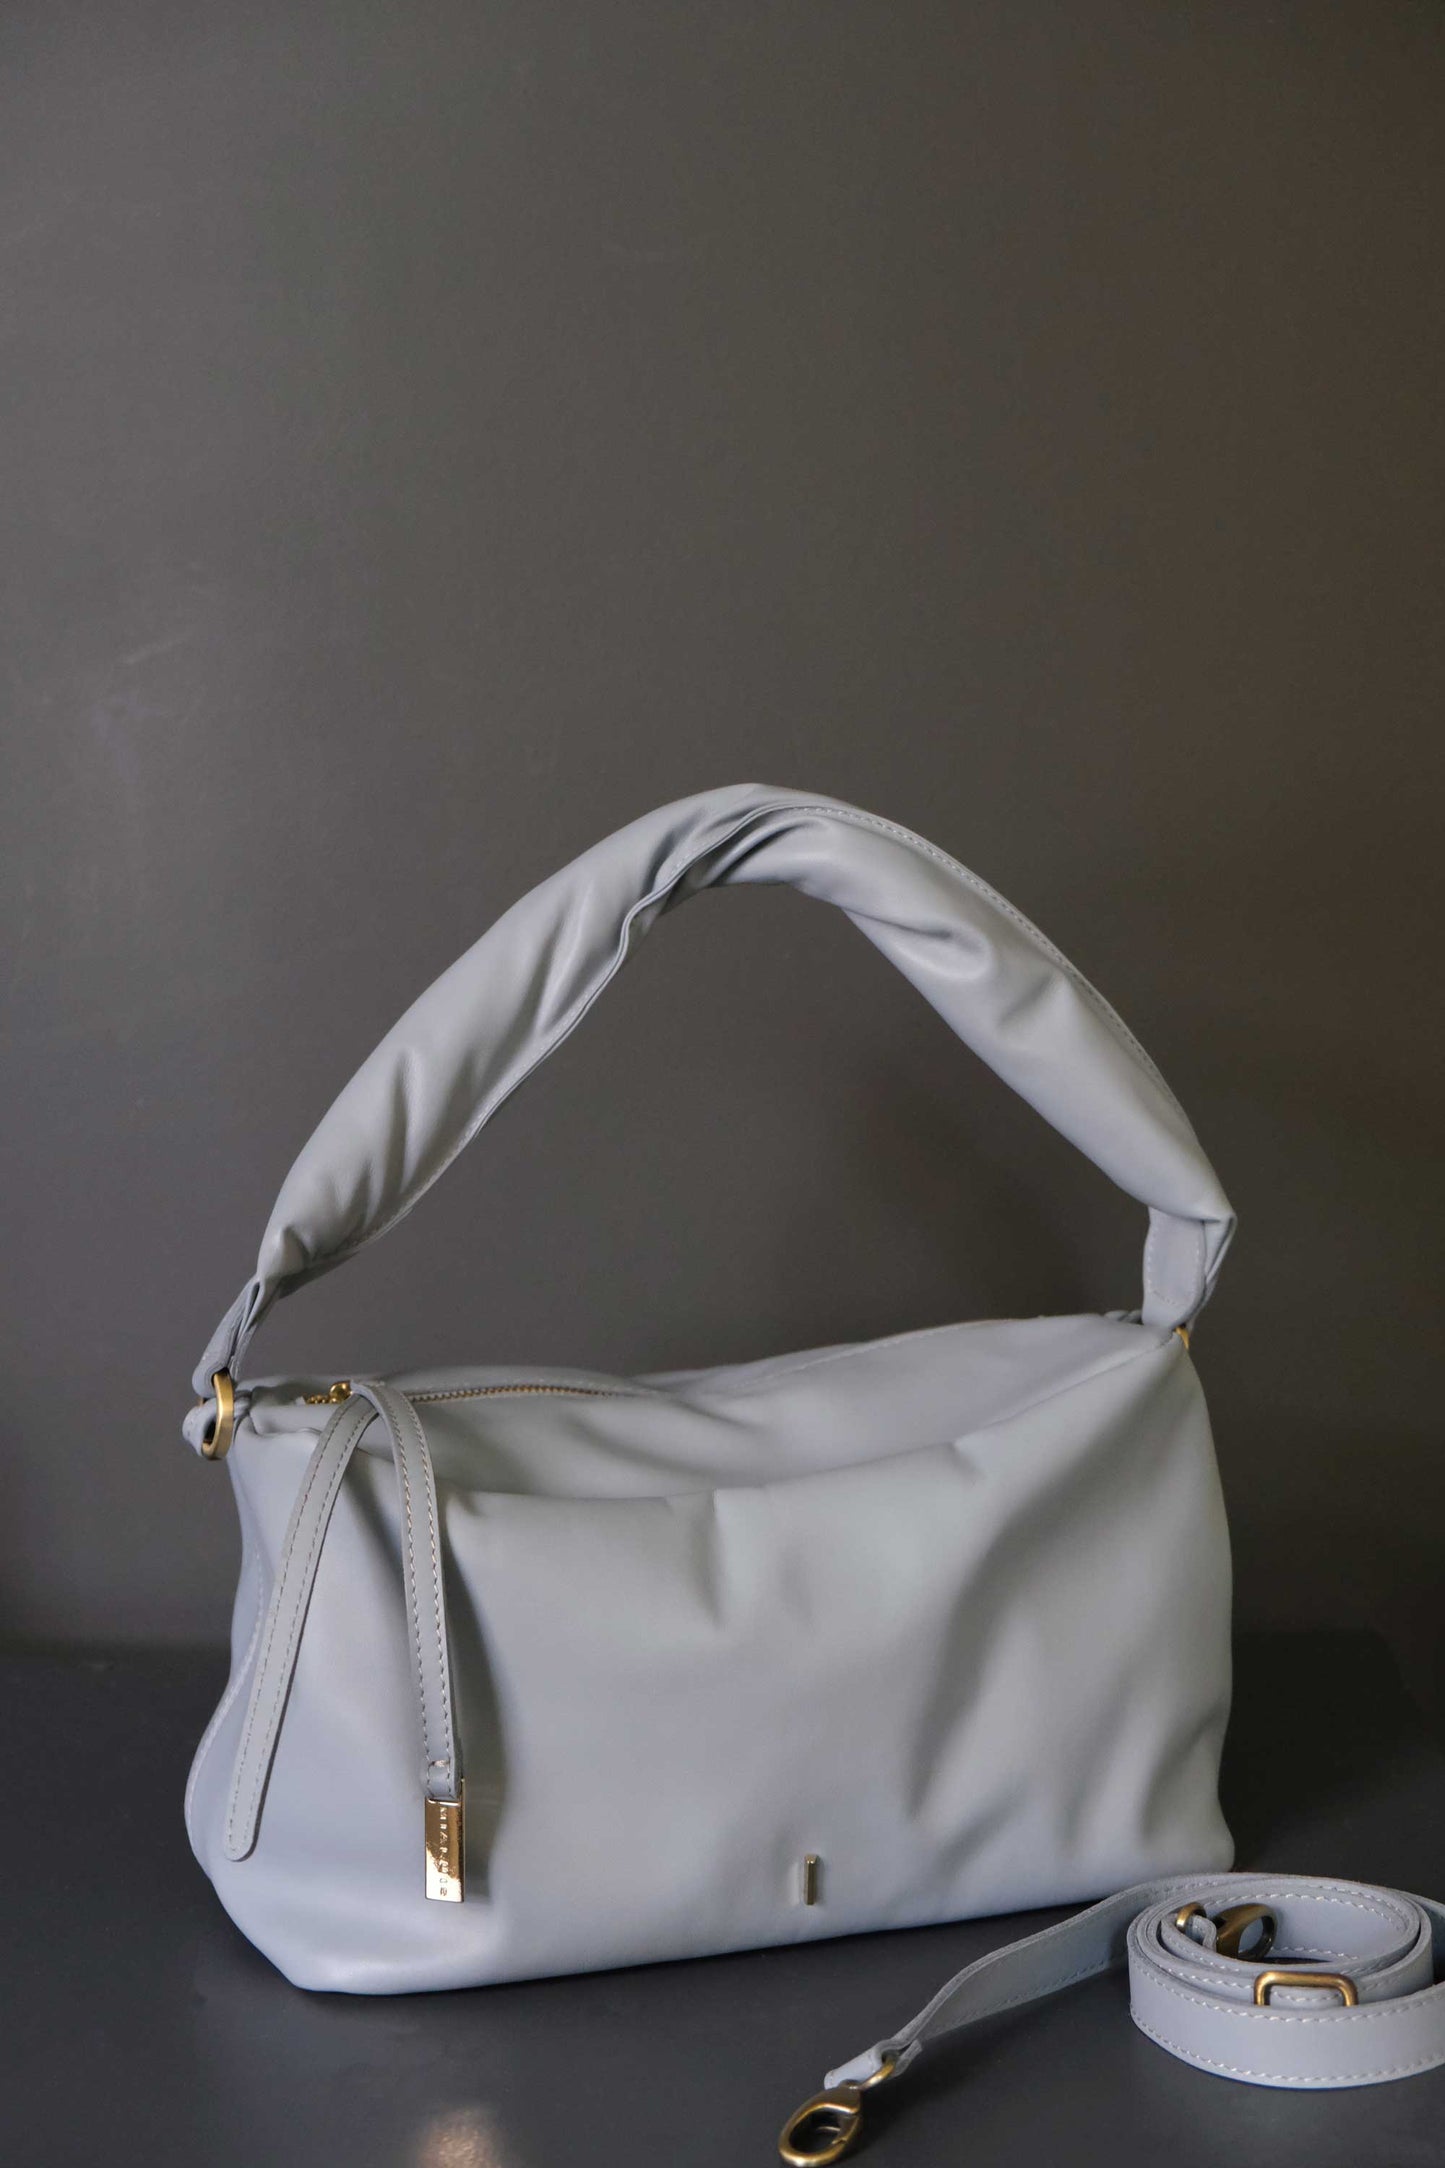 Bobo top handle bag in soft sky blue leather